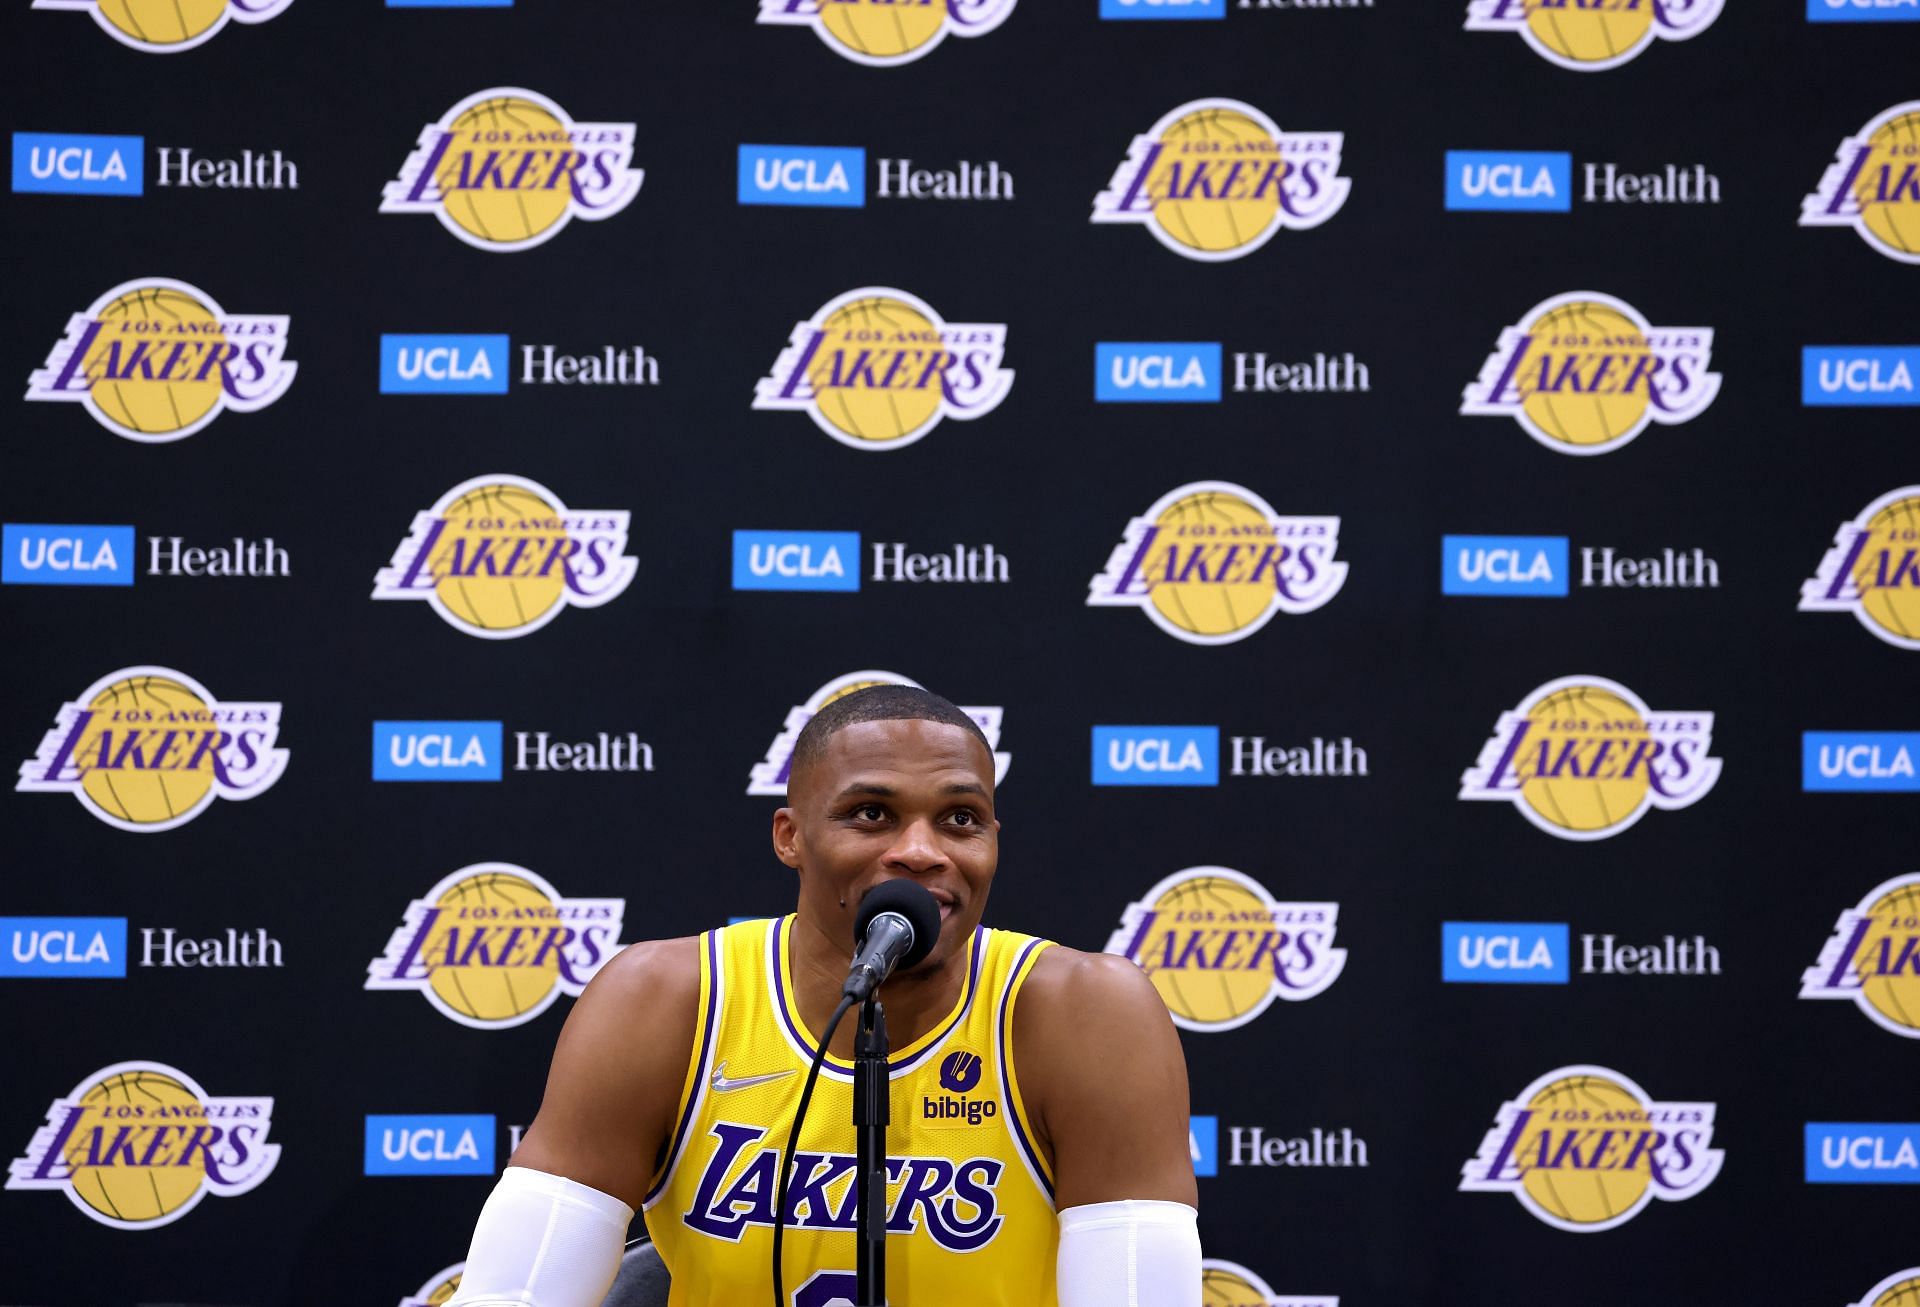 "Russ' Lakers debut was very concerning & it has very little to do with